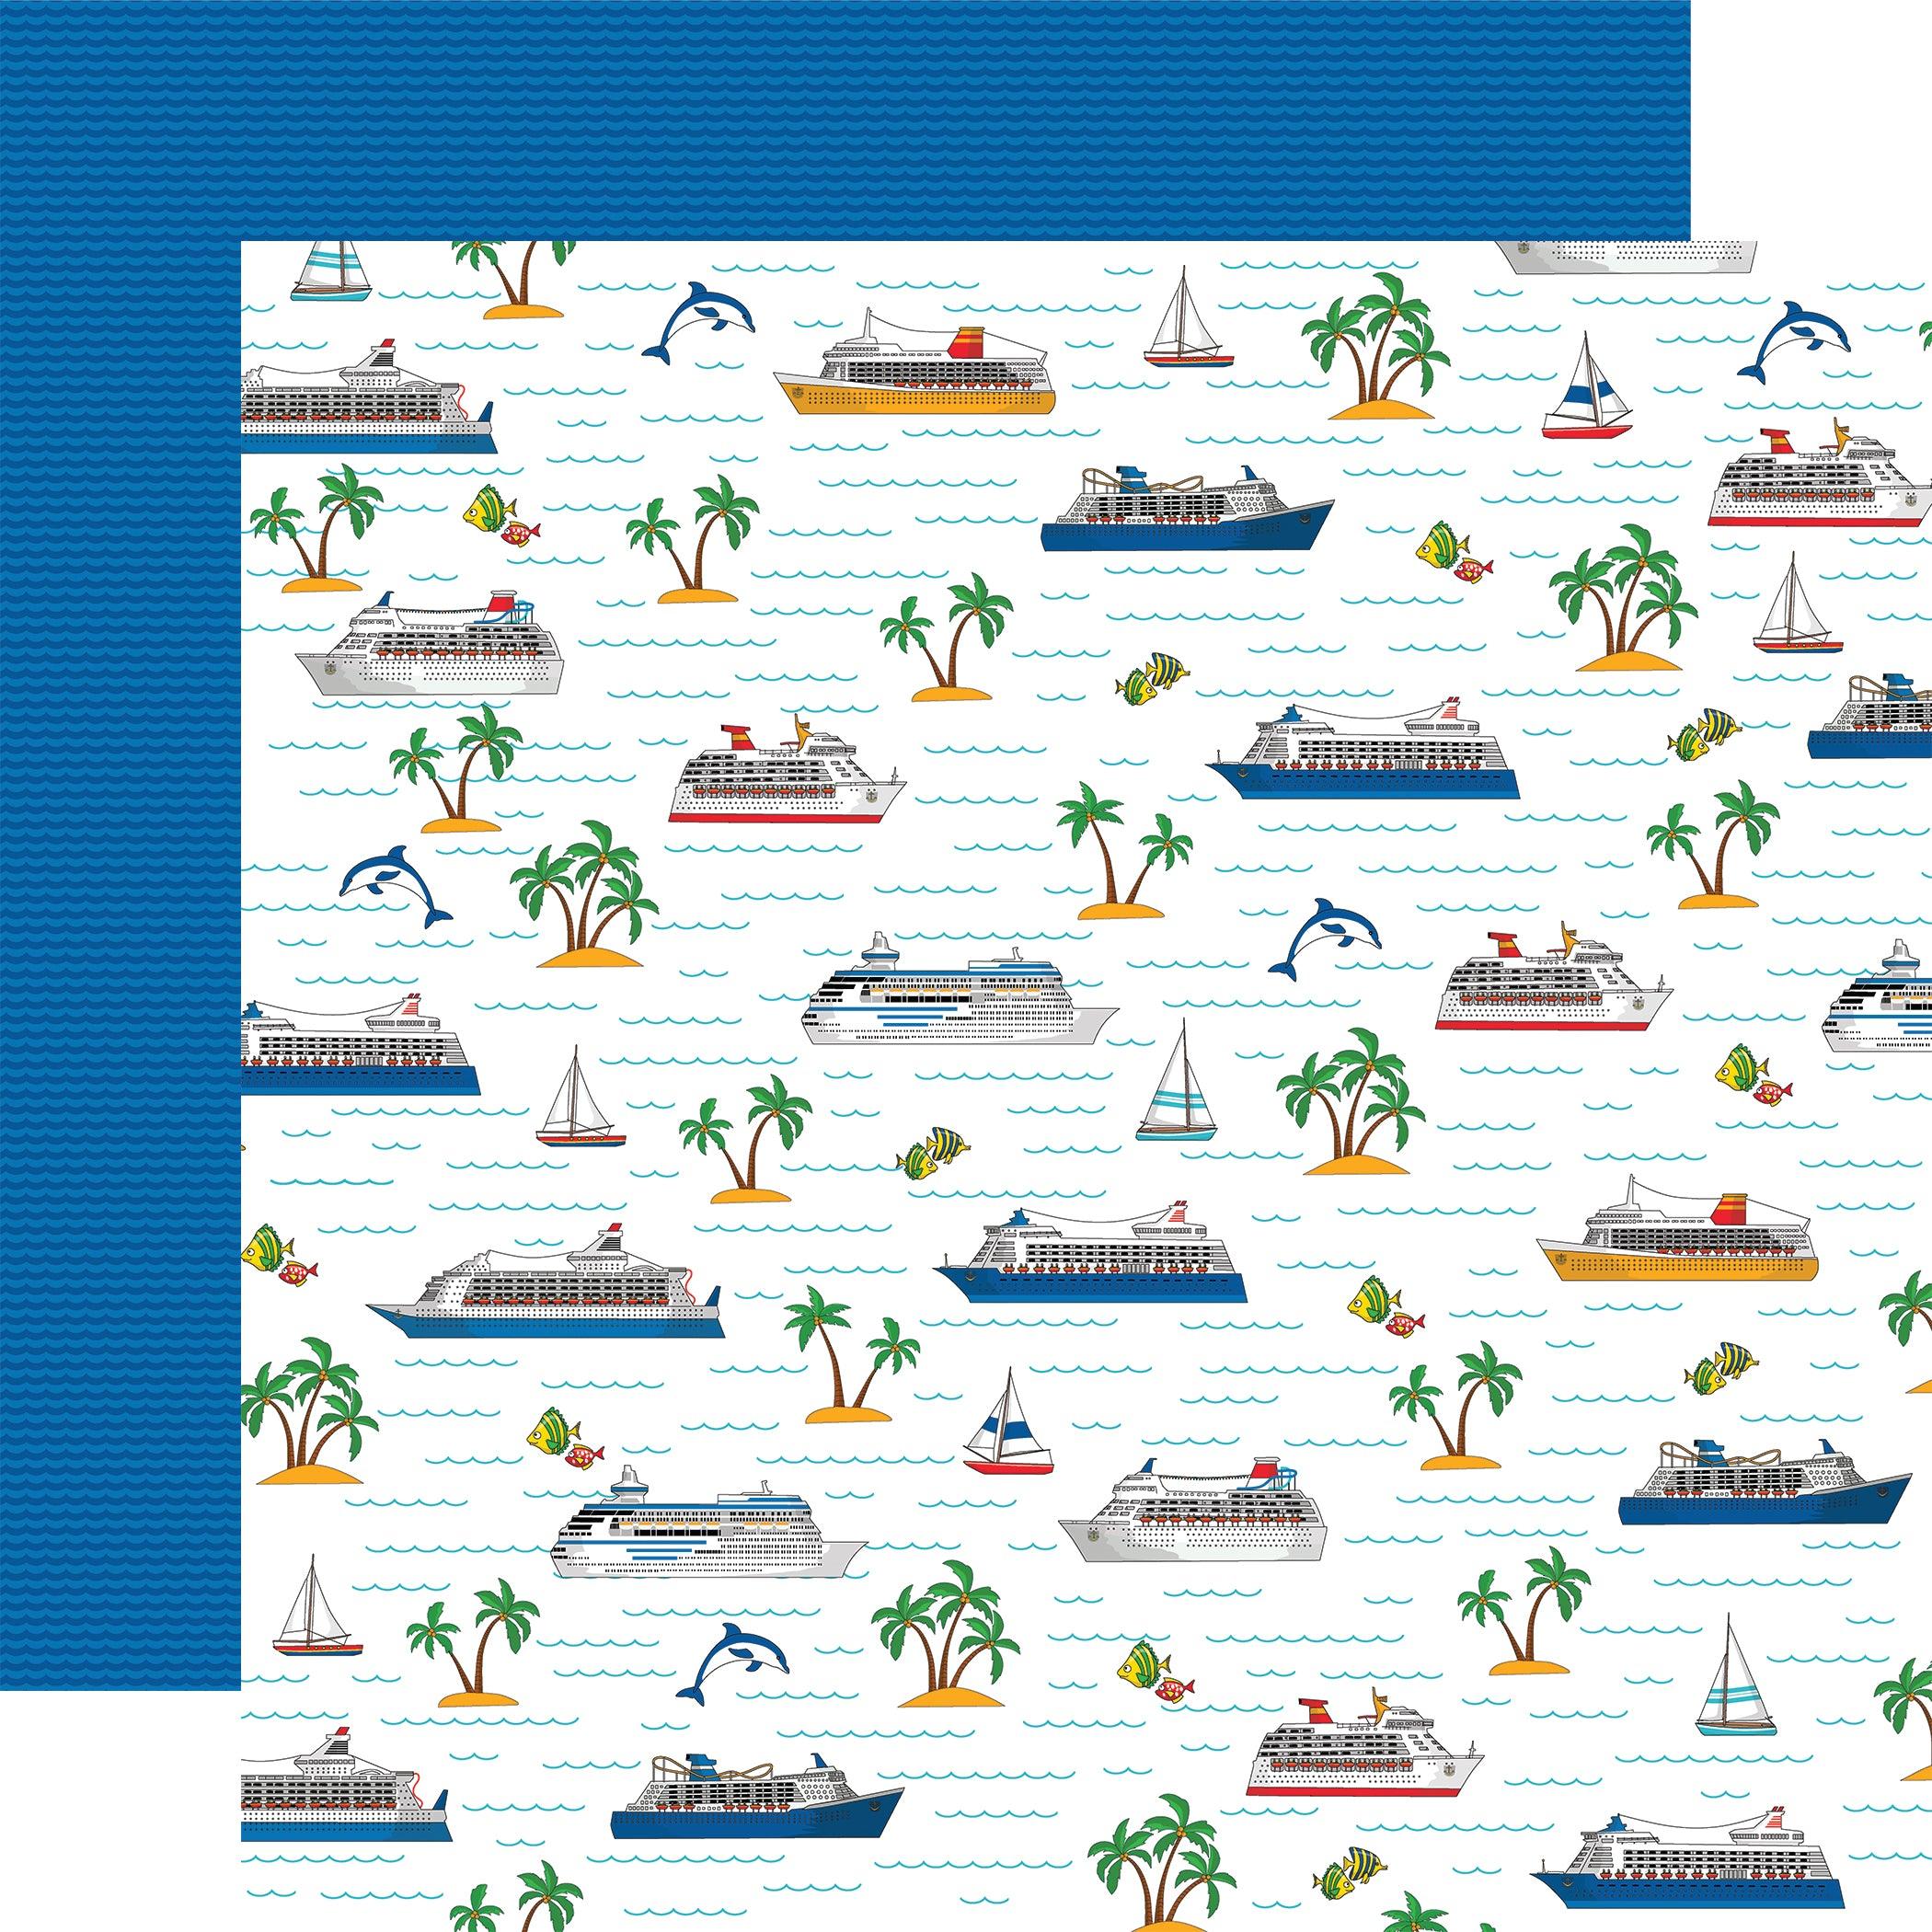 Bon Voyage Collection Smooth Sailing 12 x 12 Double-Sided Scrapbook Paper by Carta Bella - Scrapbook Supply Companies